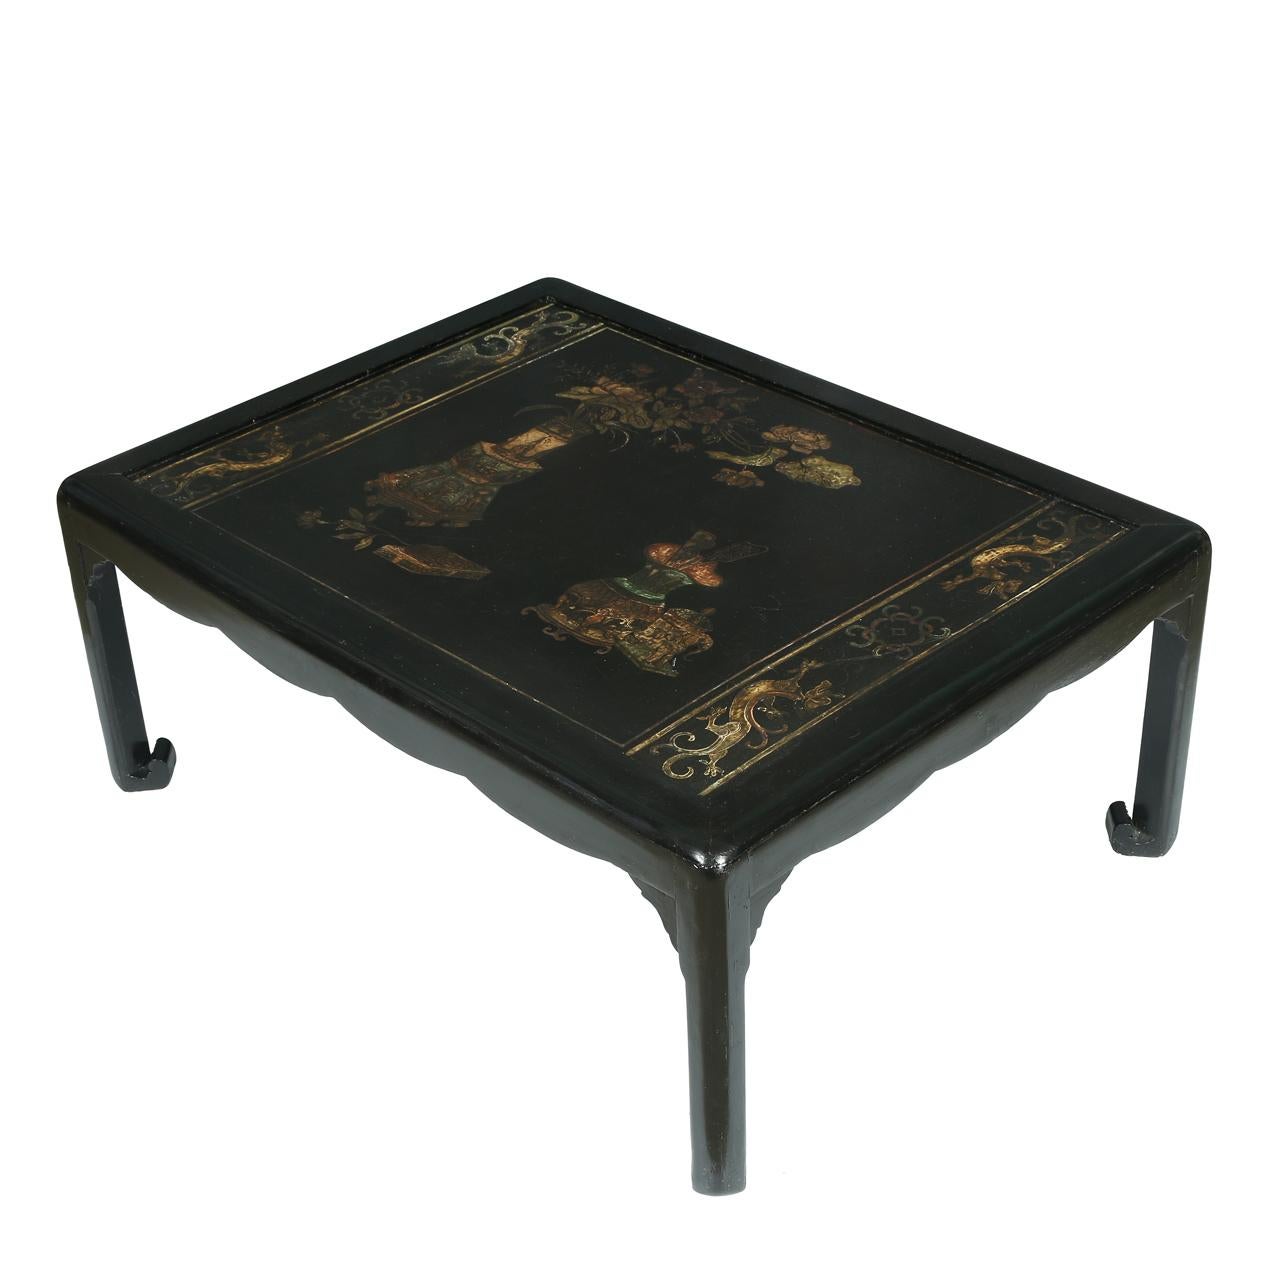 Black Chinese wood coffee table with chinoiserie painted decoration.  A glass top sits on top to protect the table and provides a flat surface.